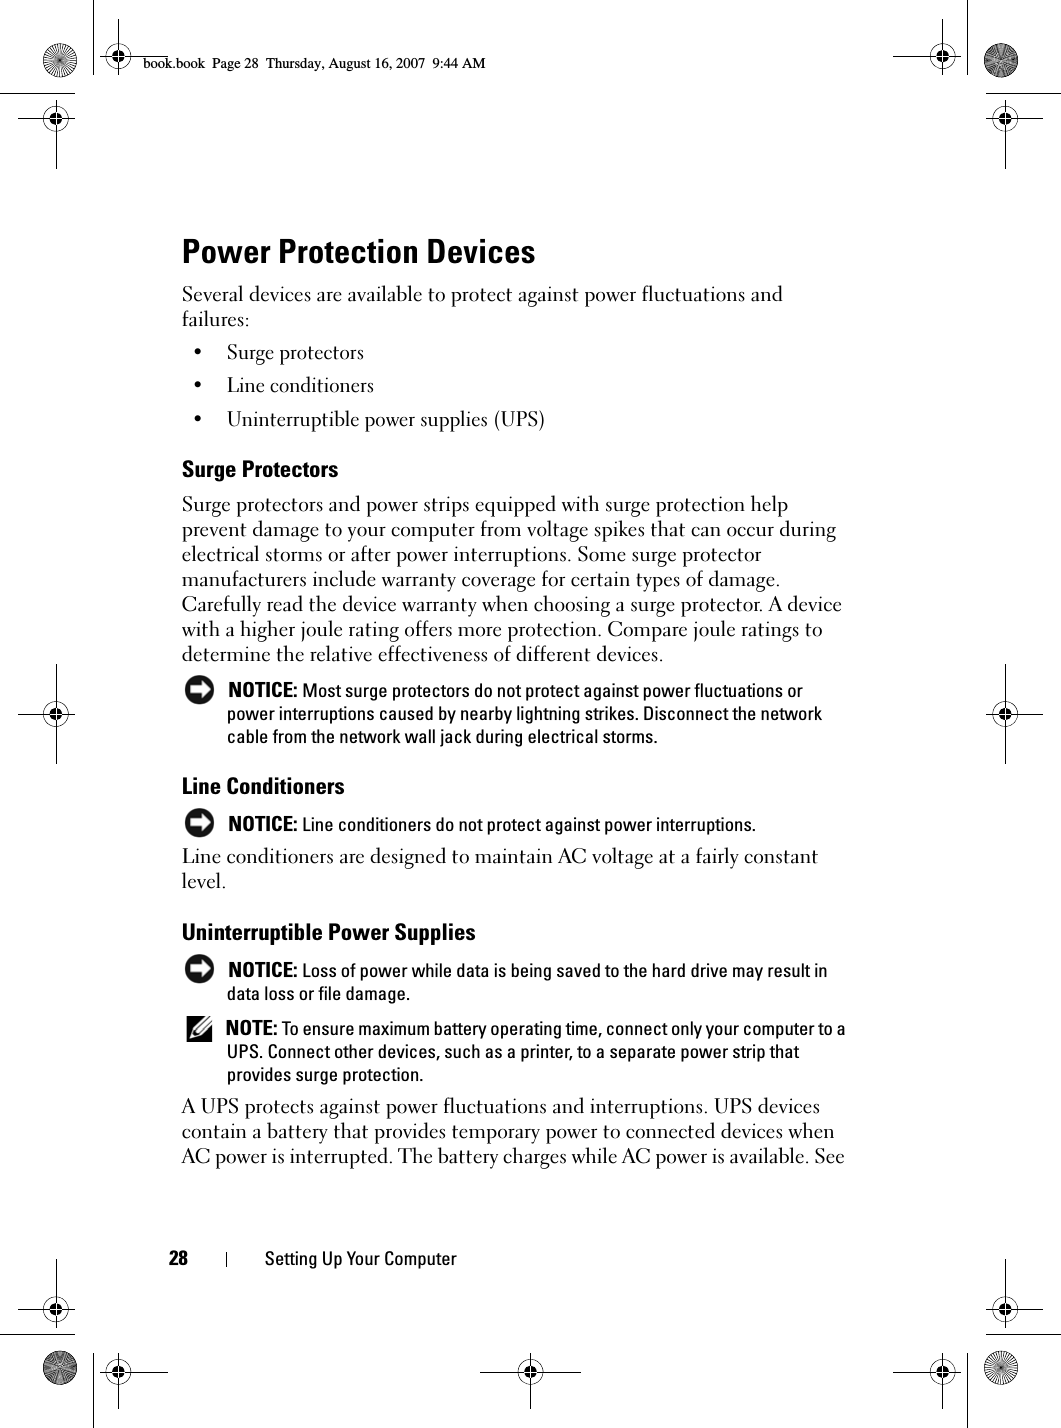 28 Setting Up Your ComputerPower Protection DevicesSeveral devices are available to protect against power fluctuations and failures:• Surge protectors• Line conditioners• Uninterruptible power supplies (UPS)Surge ProtectorsSurge protectors and power strips equipped with surge protection help prevent damage to your computer from voltage spikes that can occur during electrical storms or after power interruptions. Some surge protector manufacturers include warranty coverage for certain types of damage. Carefully read the device warranty when choosing a surge protector. A device with a higher joule rating offers more protection. Compare joule ratings to determine the relative effectiveness of different devices. NOTICE: Most surge protectors do not protect against power fluctuations or power interruptions caused by nearby lightning strikes. Disconnect the network cable from the network wall jack during electrical storms.Line Conditioners NOTICE: Line conditioners do not protect against power interruptions.Line conditioners are designed to maintain AC voltage at a fairly constant level.Uninterruptible Power Supplies NOTICE: Loss of power while data is being saved to the hard drive may result in data loss or file damage. NOTE: To ensure maximum battery operating time, connect only your computer to a UPS. Connect other devices, such as a printer, to a separate power strip that provides surge protection.A UPS protects against power fluctuations and interruptions. UPS devices contain a battery that provides temporary power to connected devices when AC power is interrupted. The battery charges while AC power is available. See book.book  Page 28  Thursday, August 16, 2007  9:44 AM